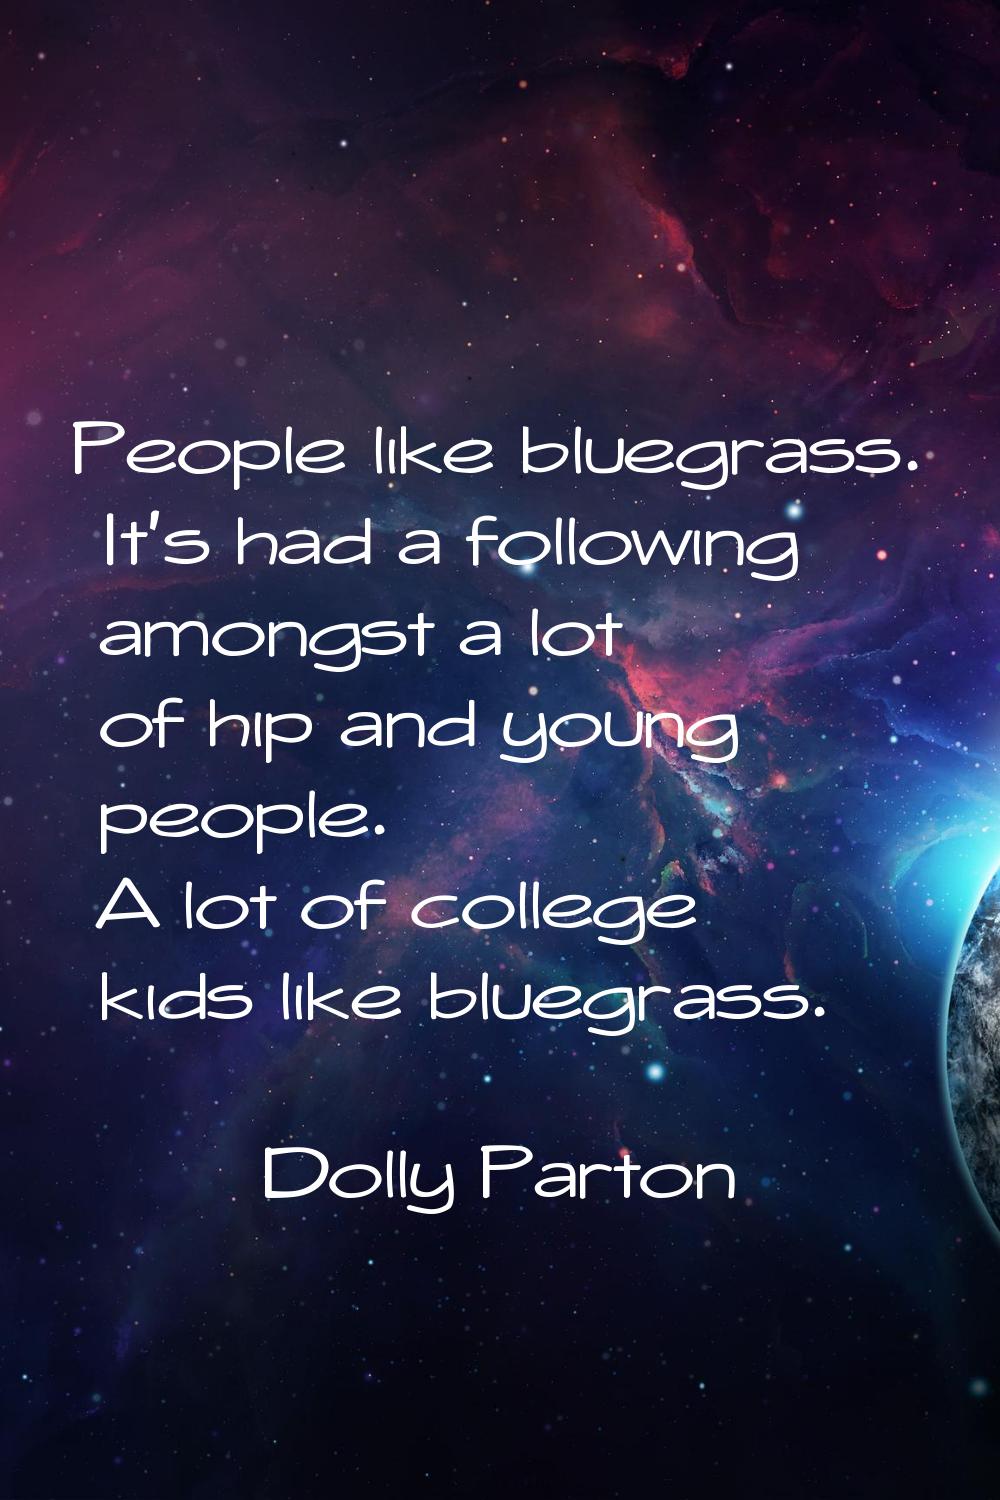 People like bluegrass. It's had a following amongst a lot of hip and young people. A lot of college